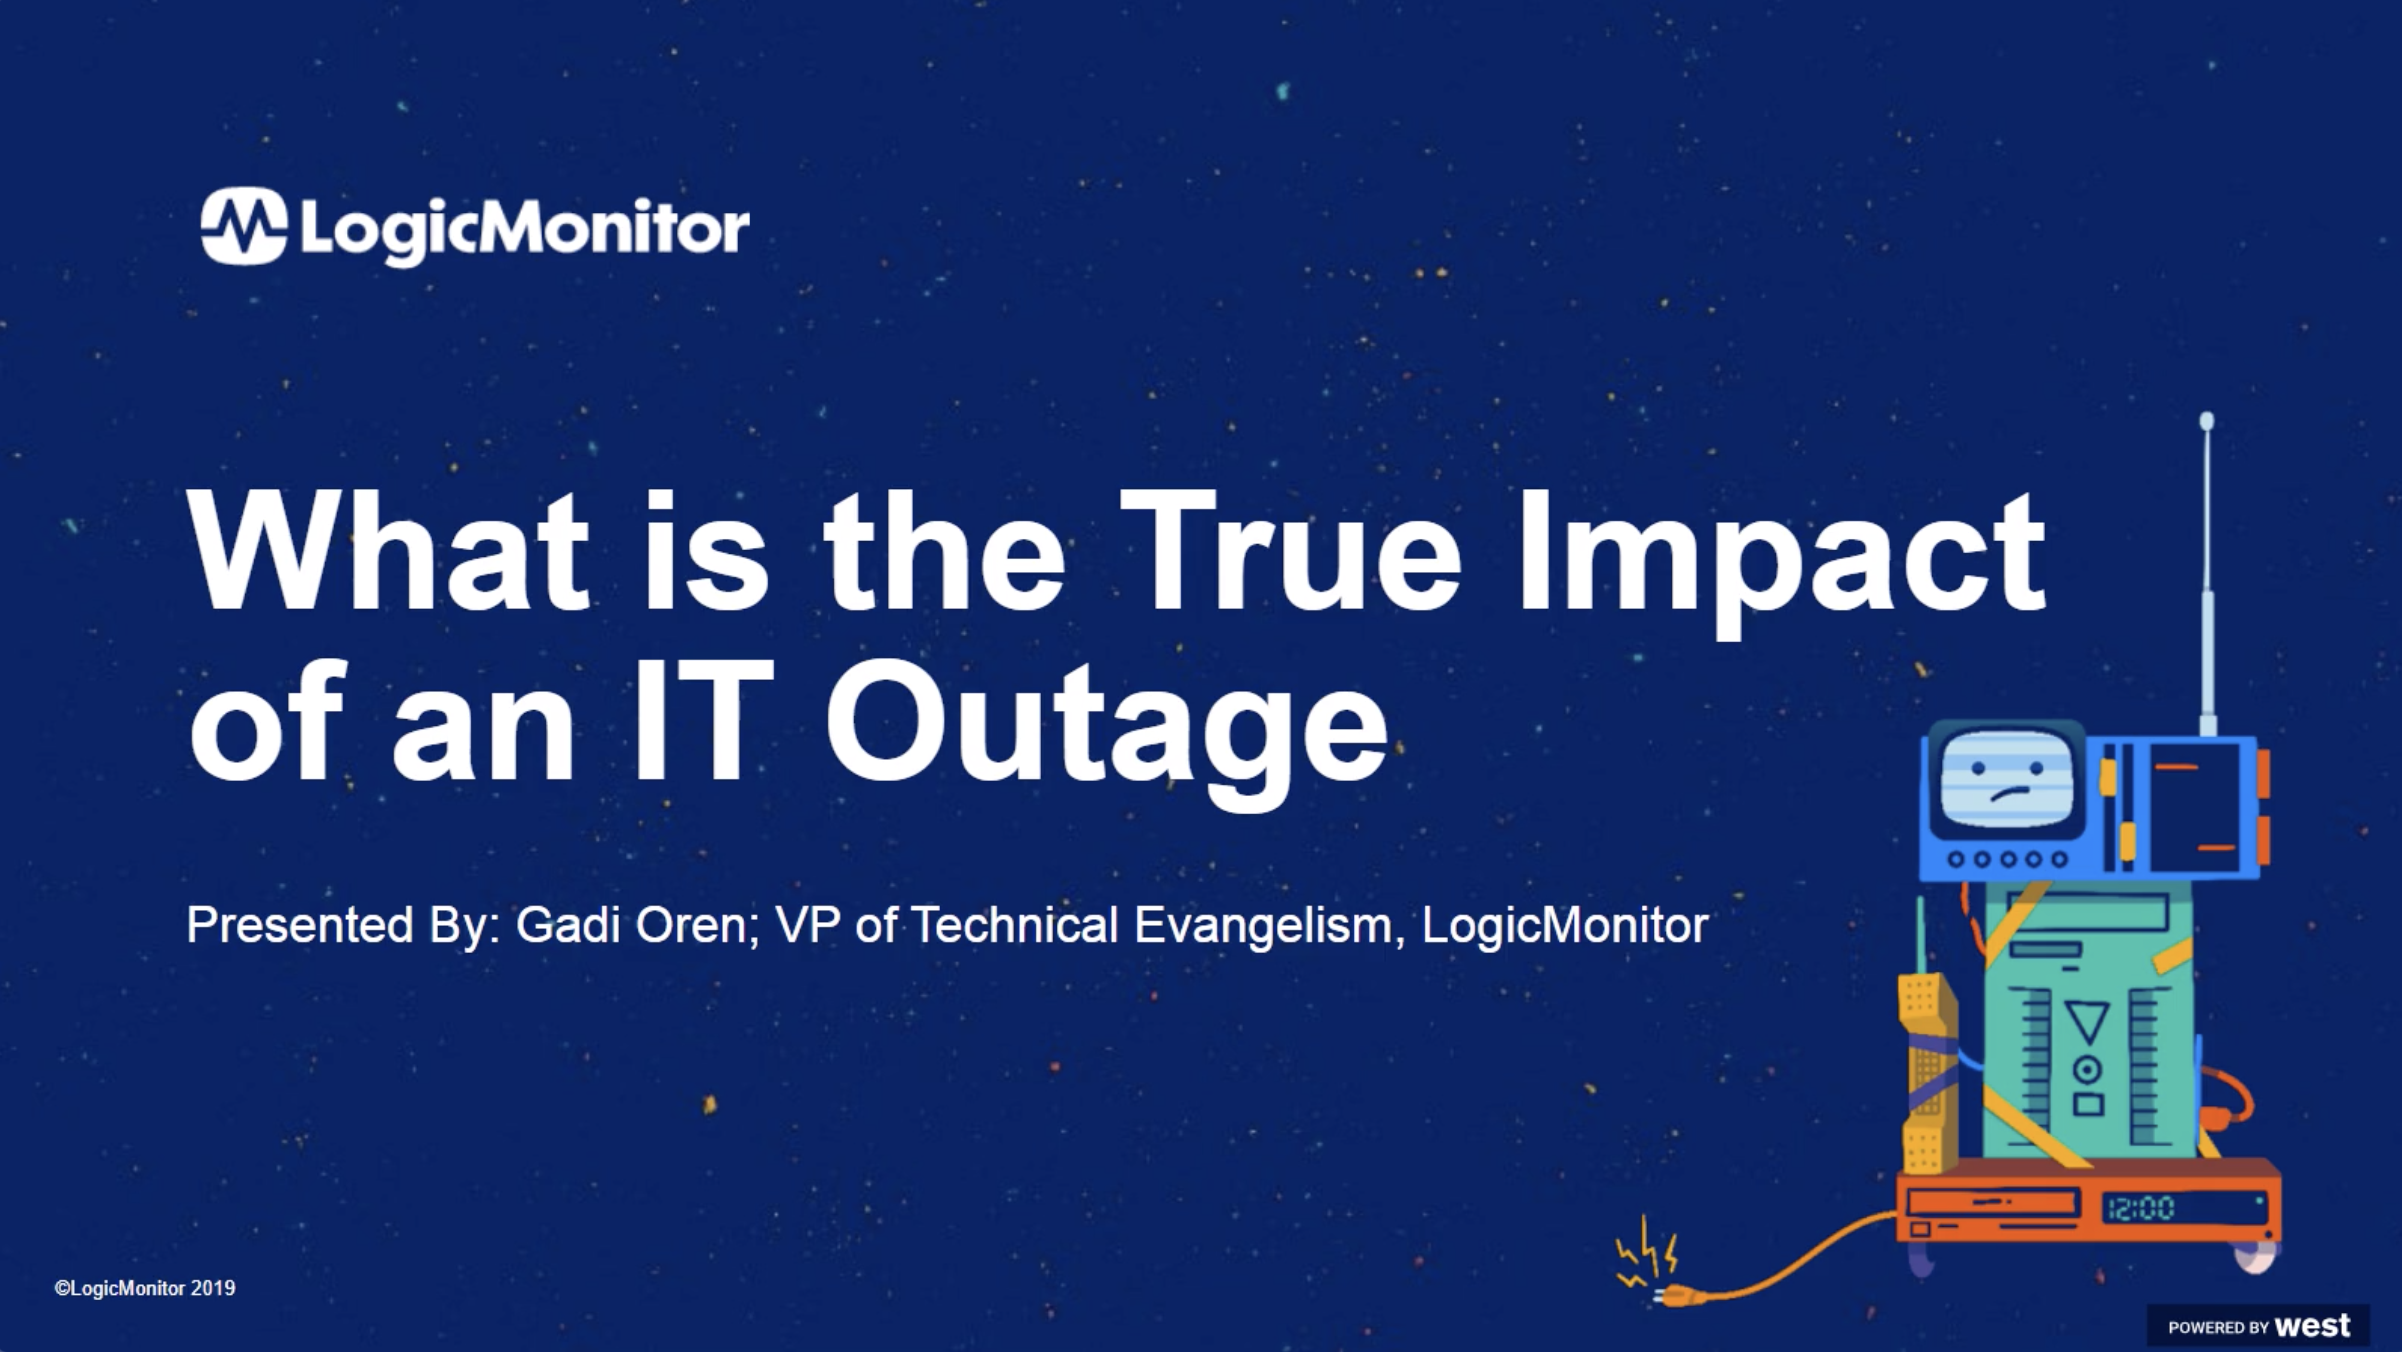 LogicMonitor - What is the True Impact of an IT Outage Card